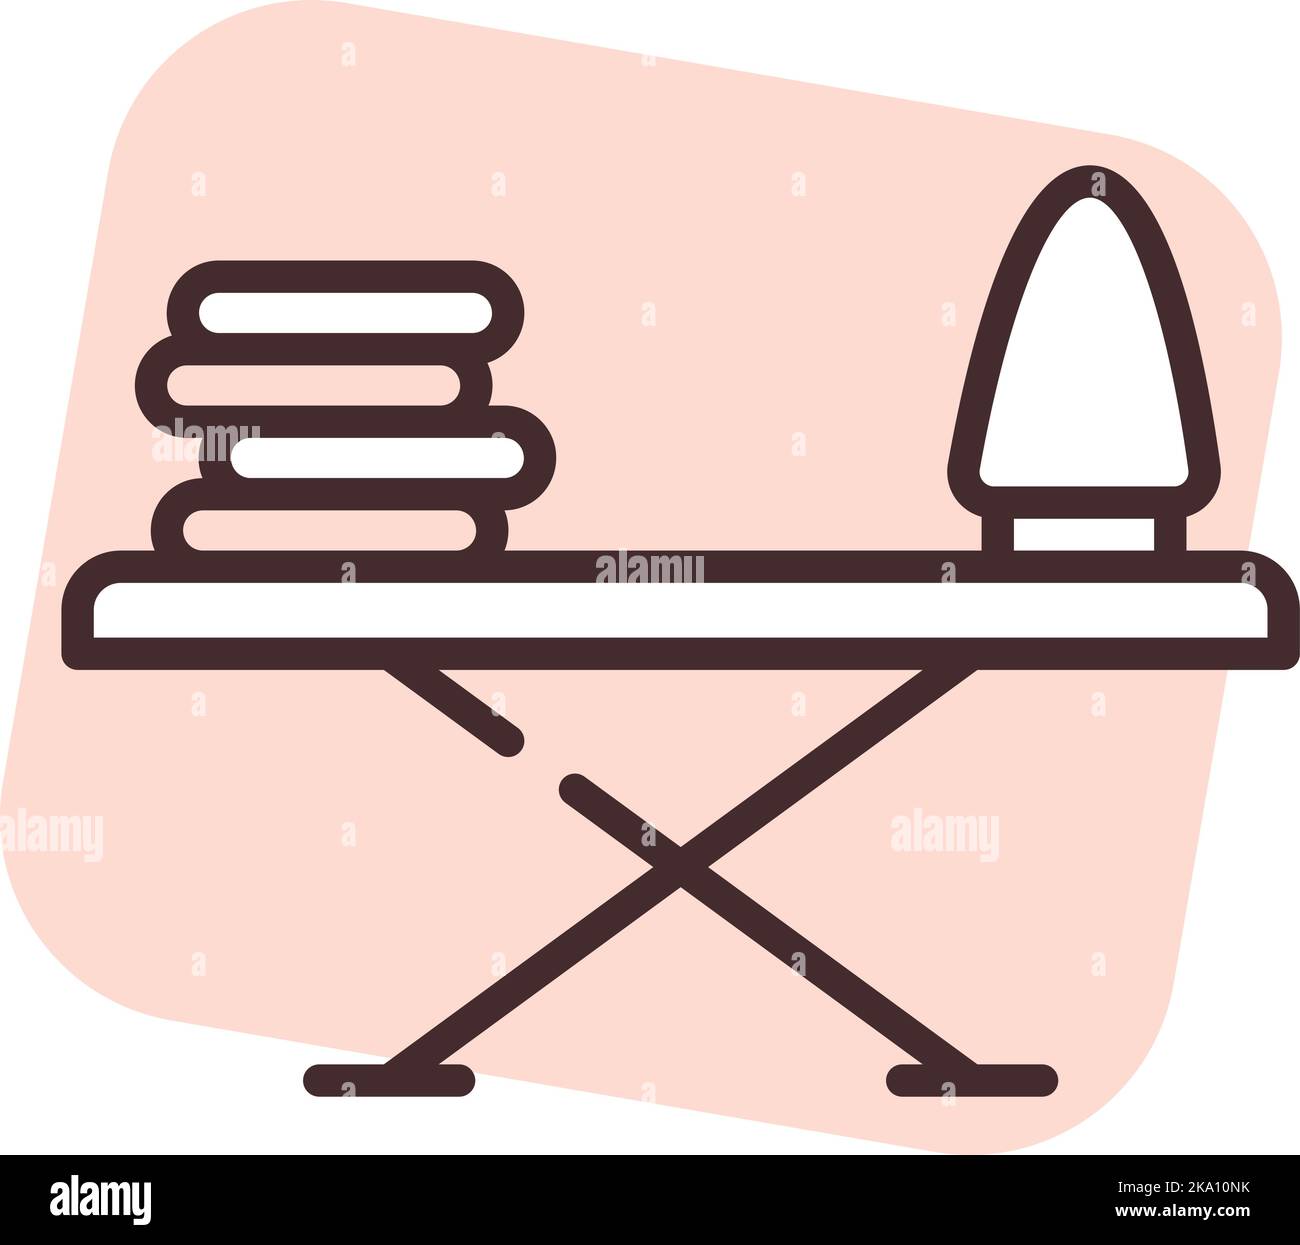 Furniture iron desk, illustration or icon, vector on white background. Stock Vector